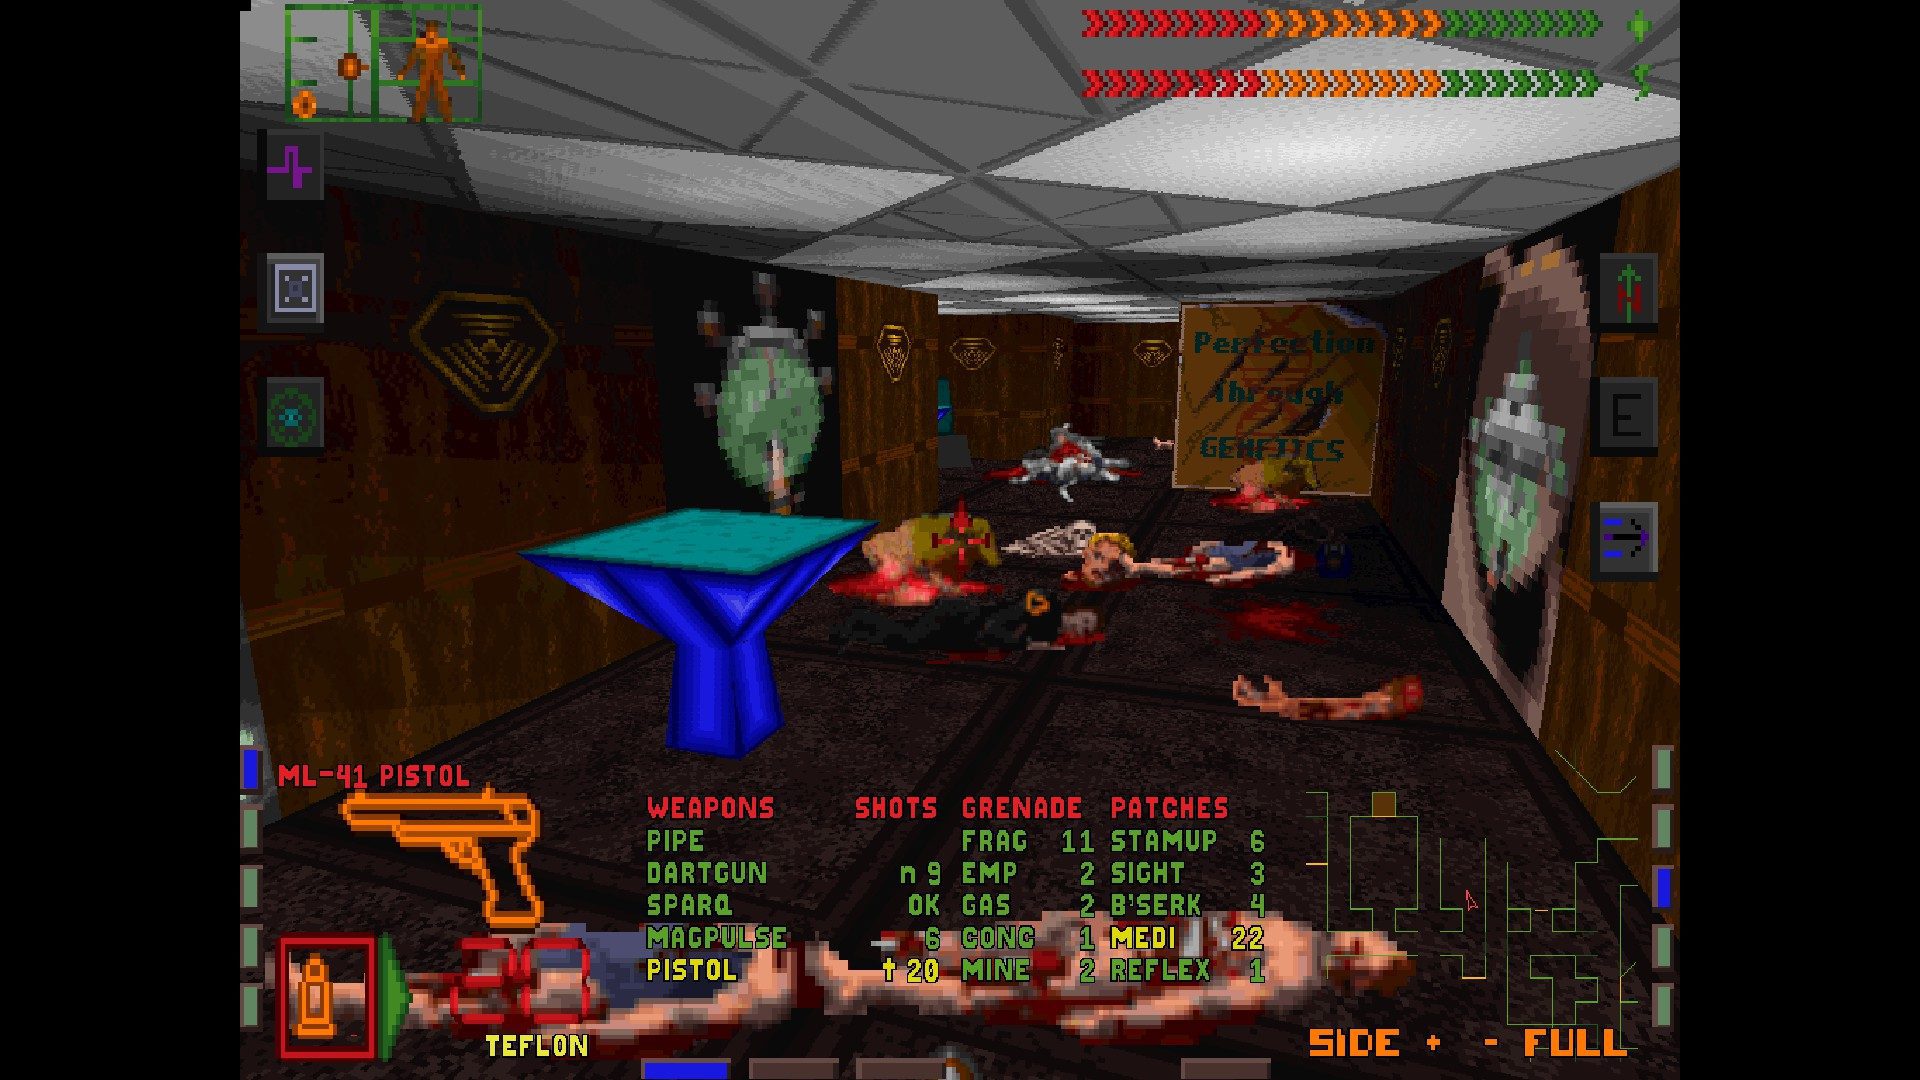 system shock enhanced edition making the game playable